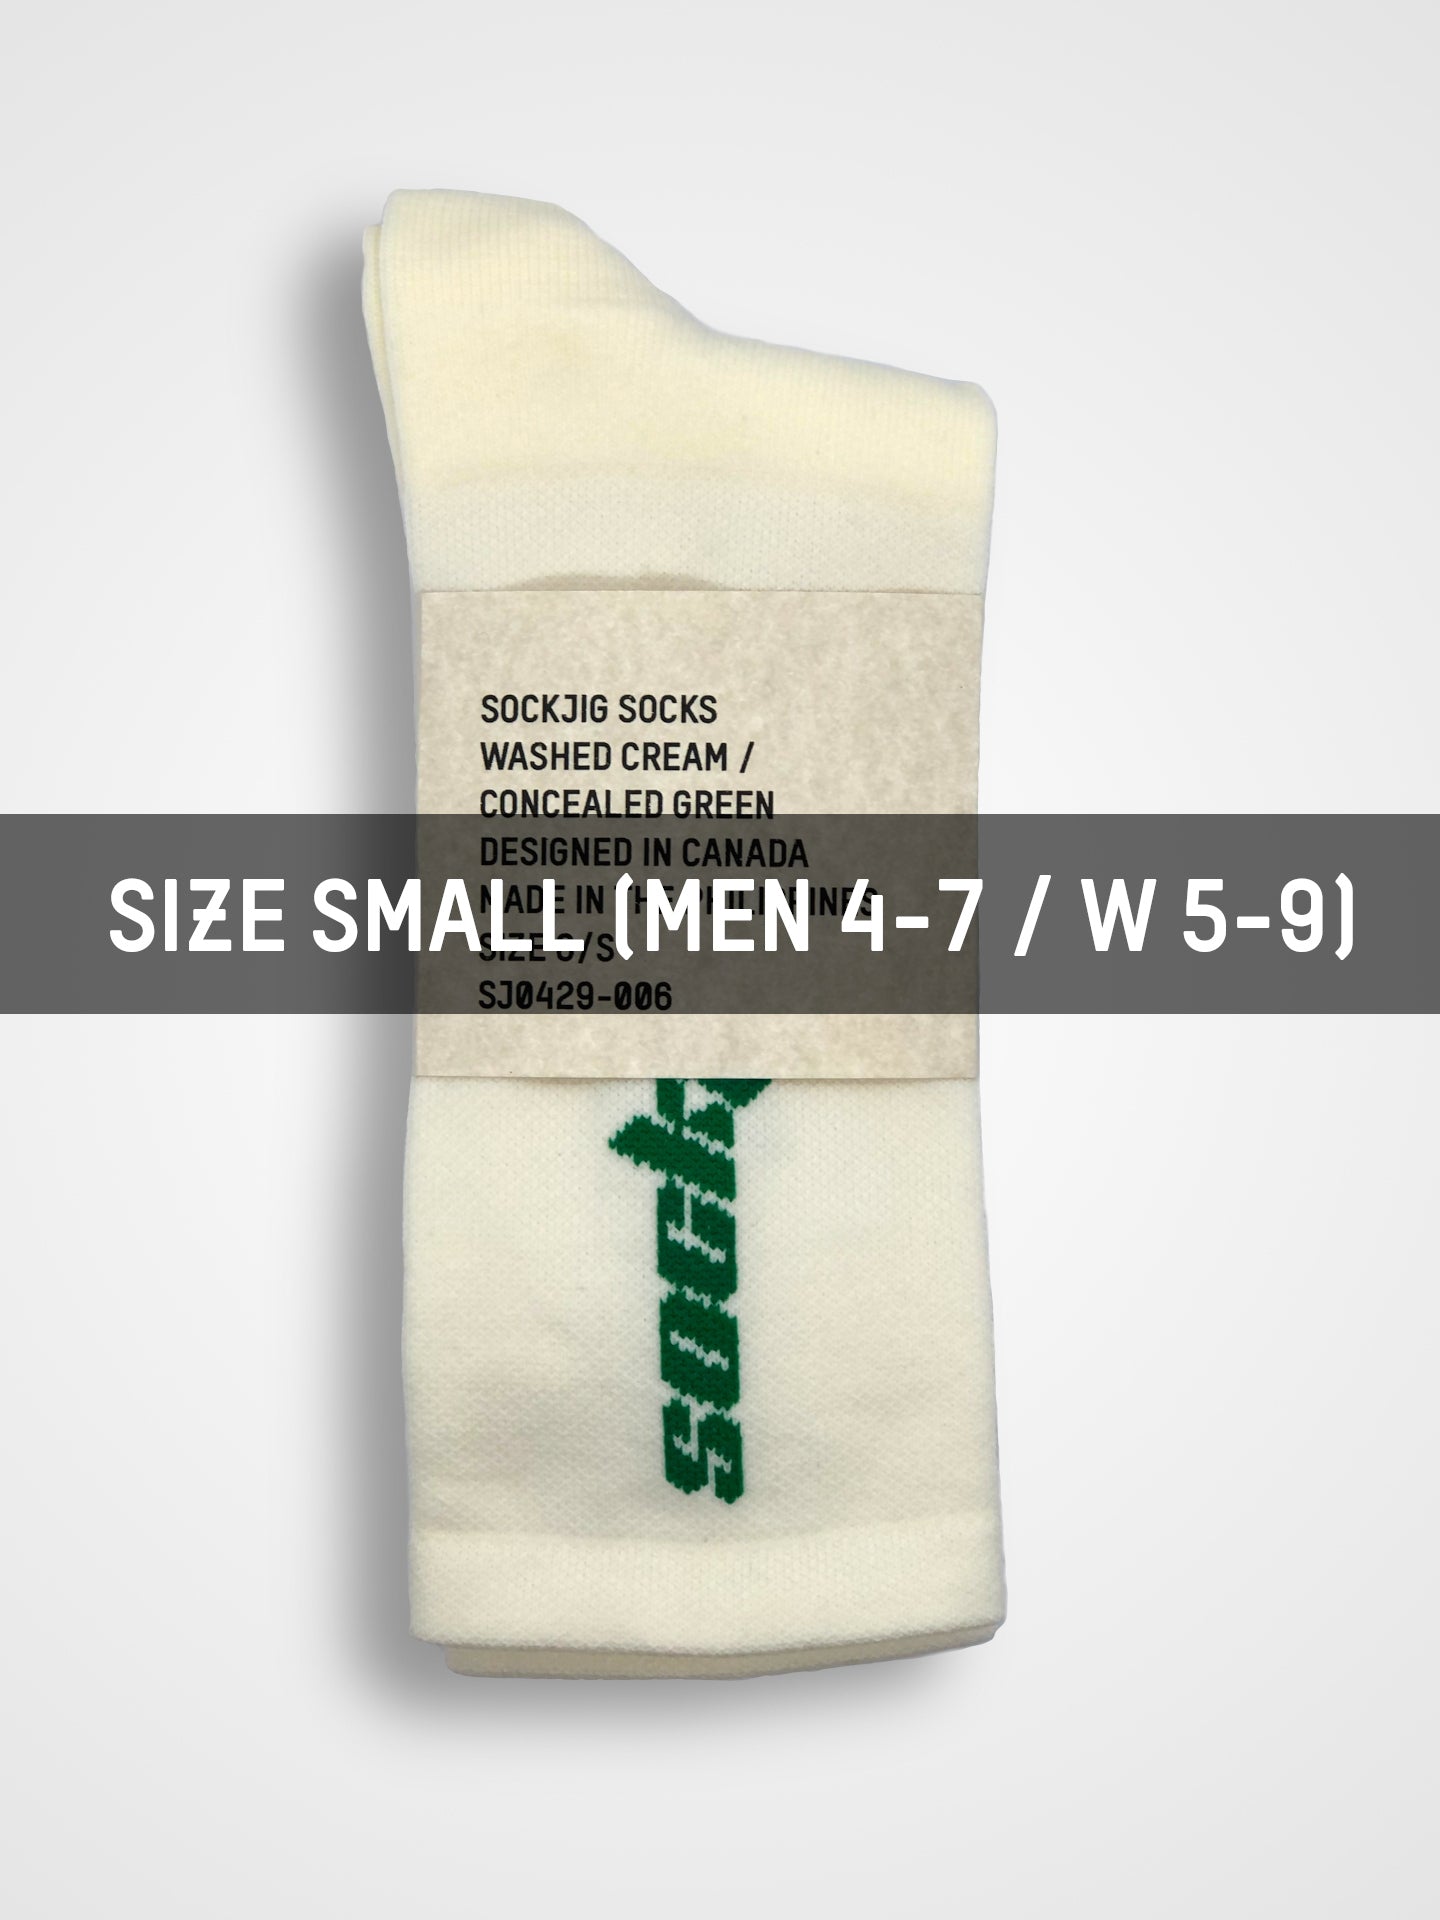 Sockjig Socks - Washed Cream / Concealed Green SIZE SMALL